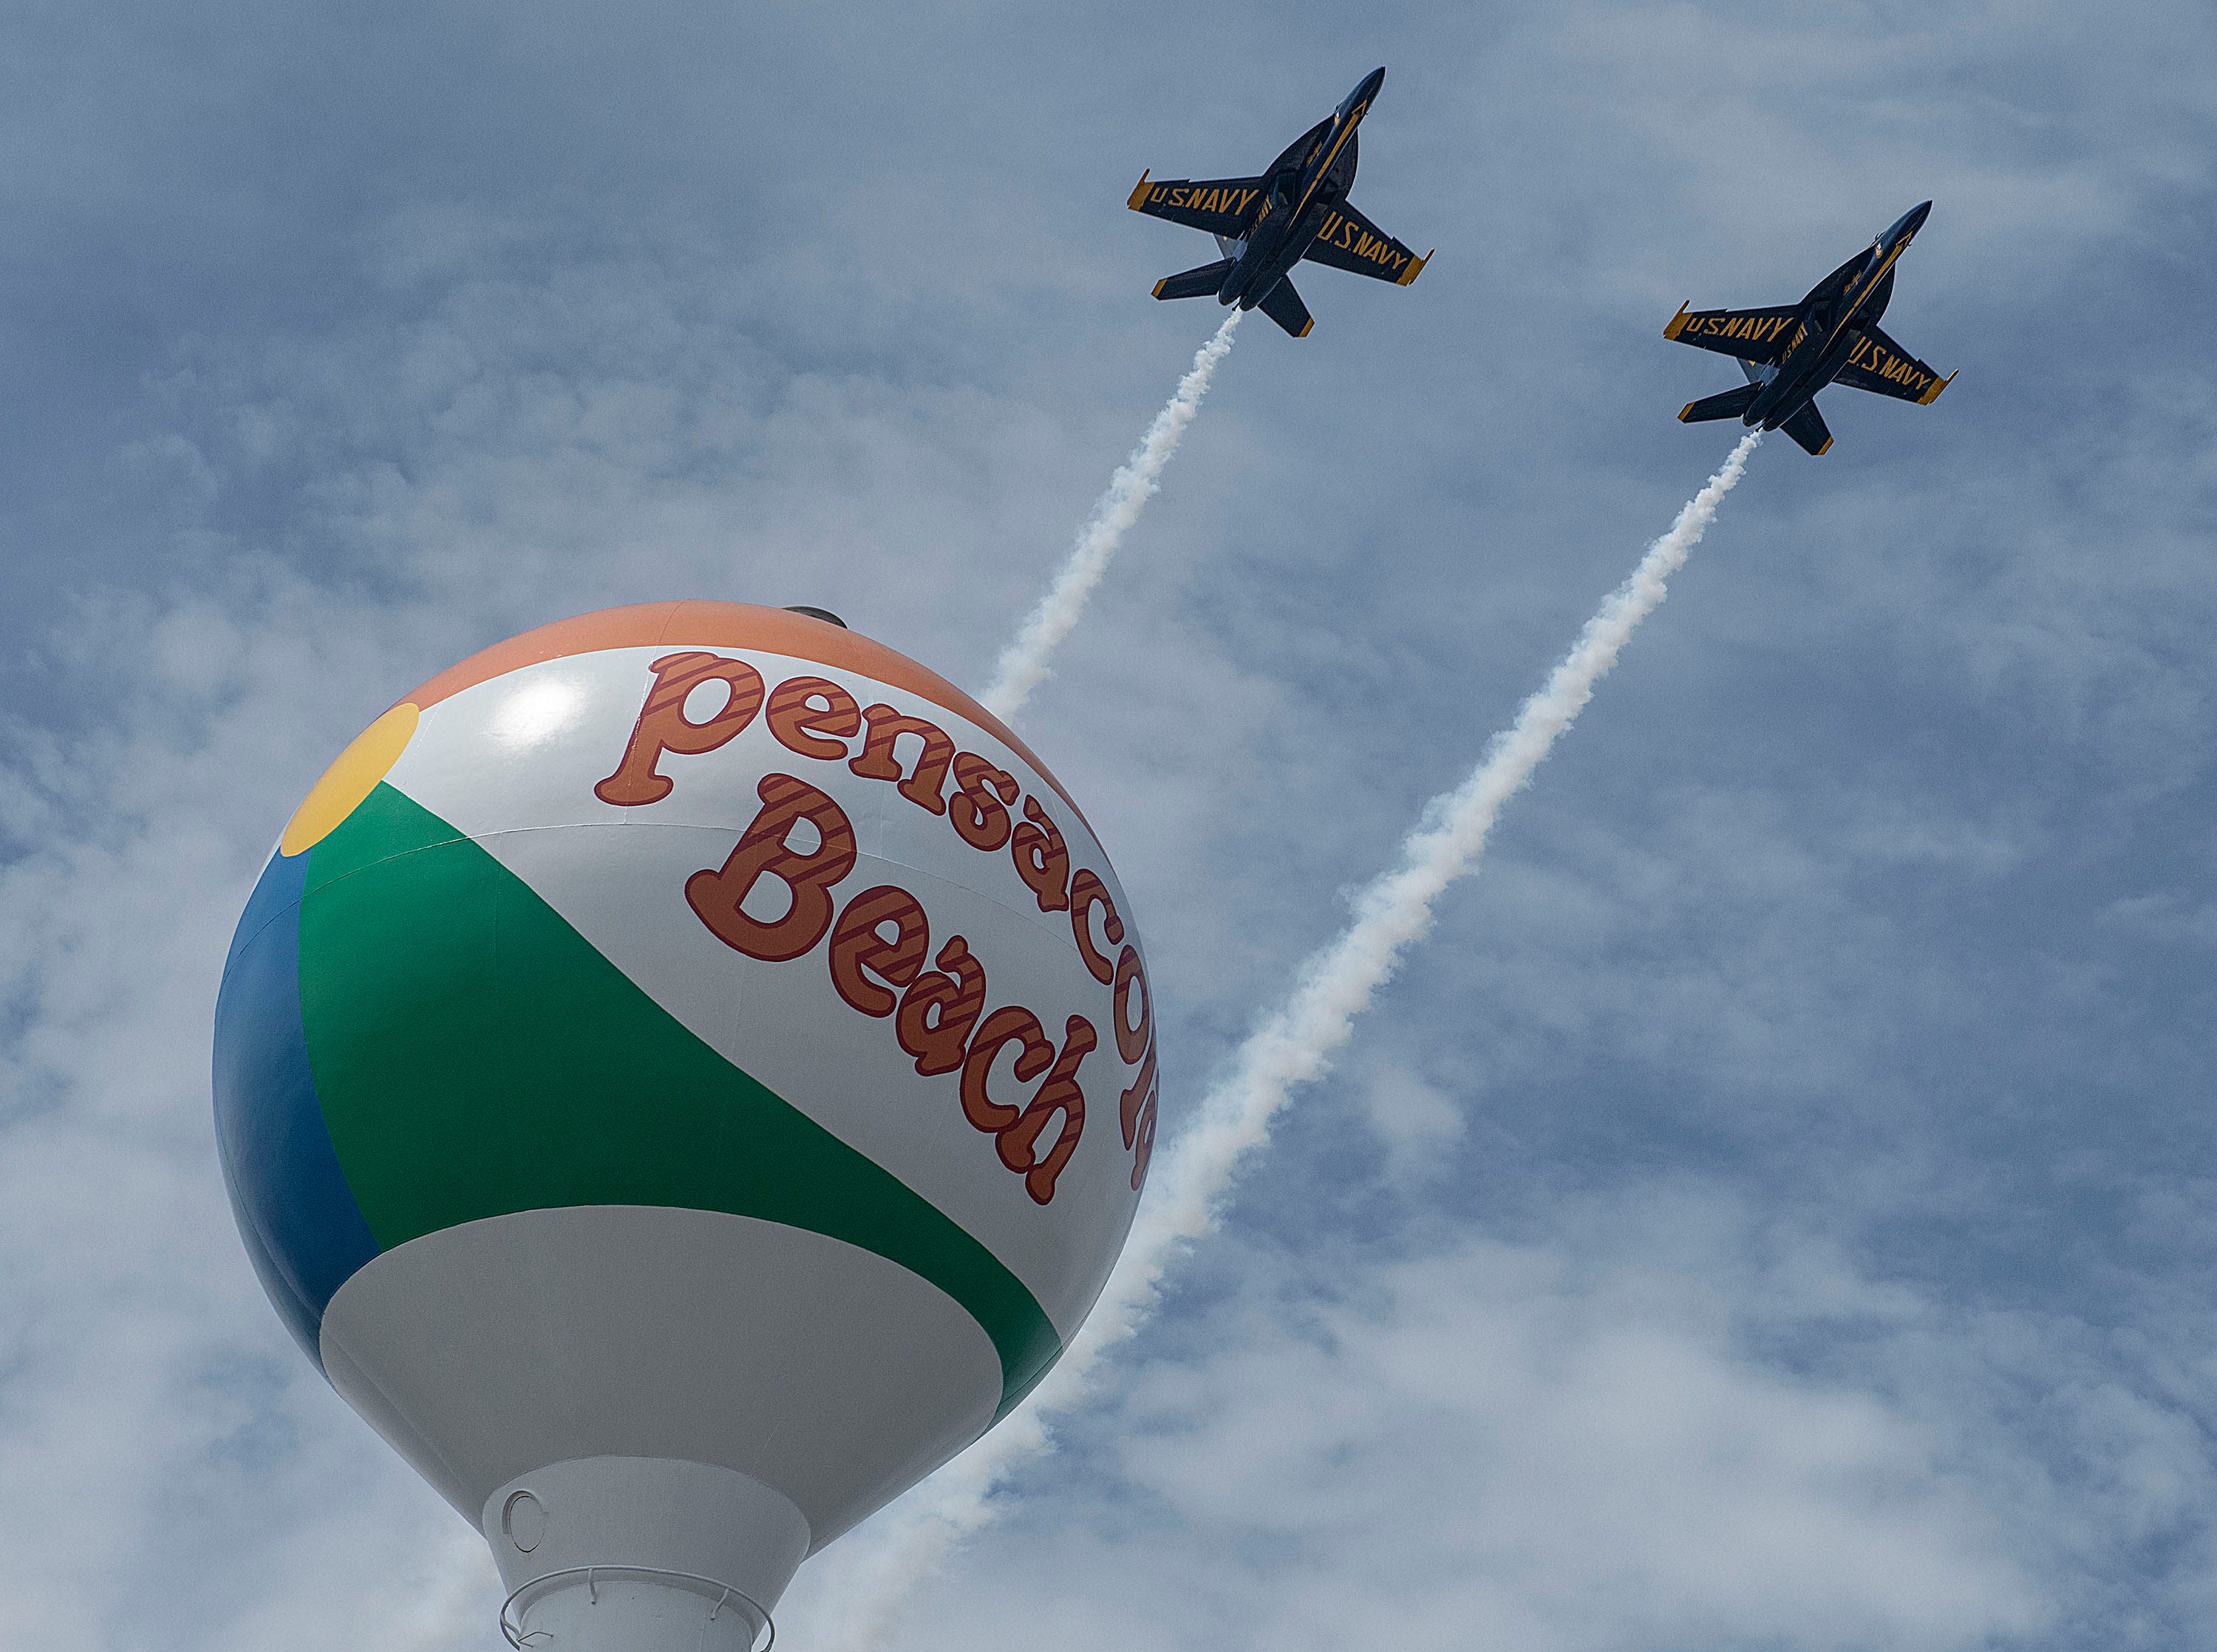 Craving more after Pensacola Beach Air Show? Here's the Blue Angels August practice days